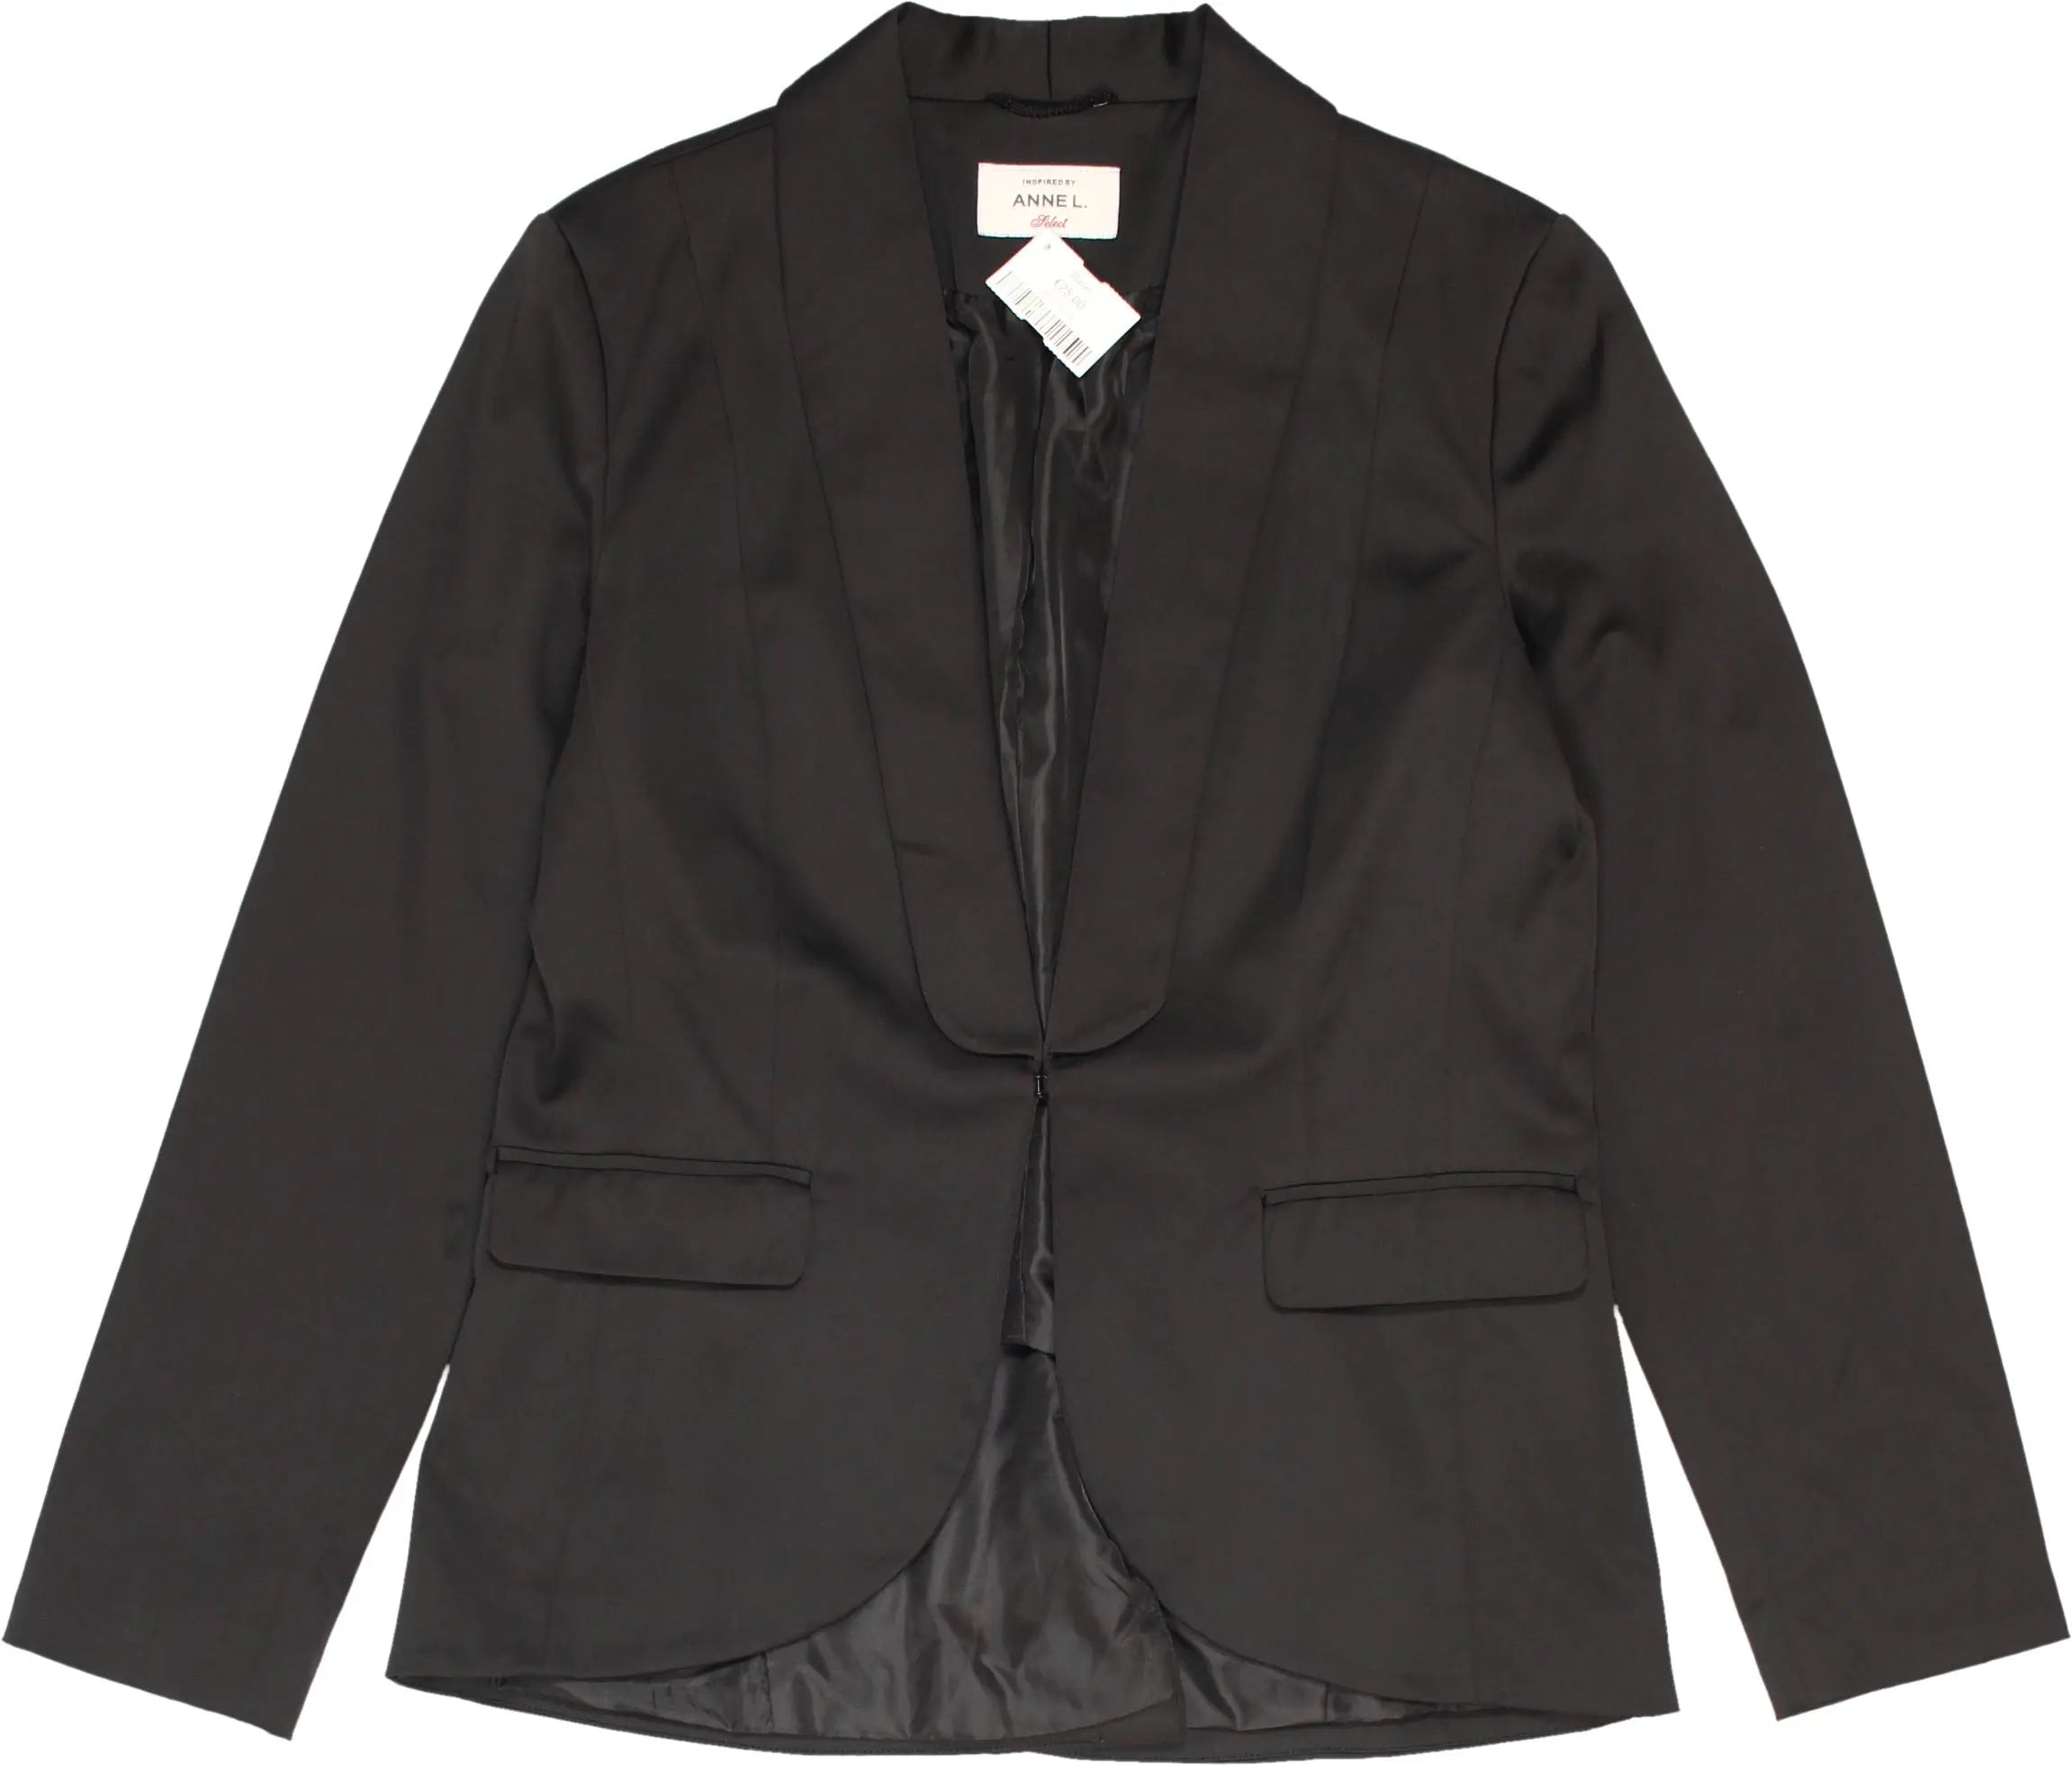 Anne L. - Blazer- ThriftTale.com - Vintage and second handclothing